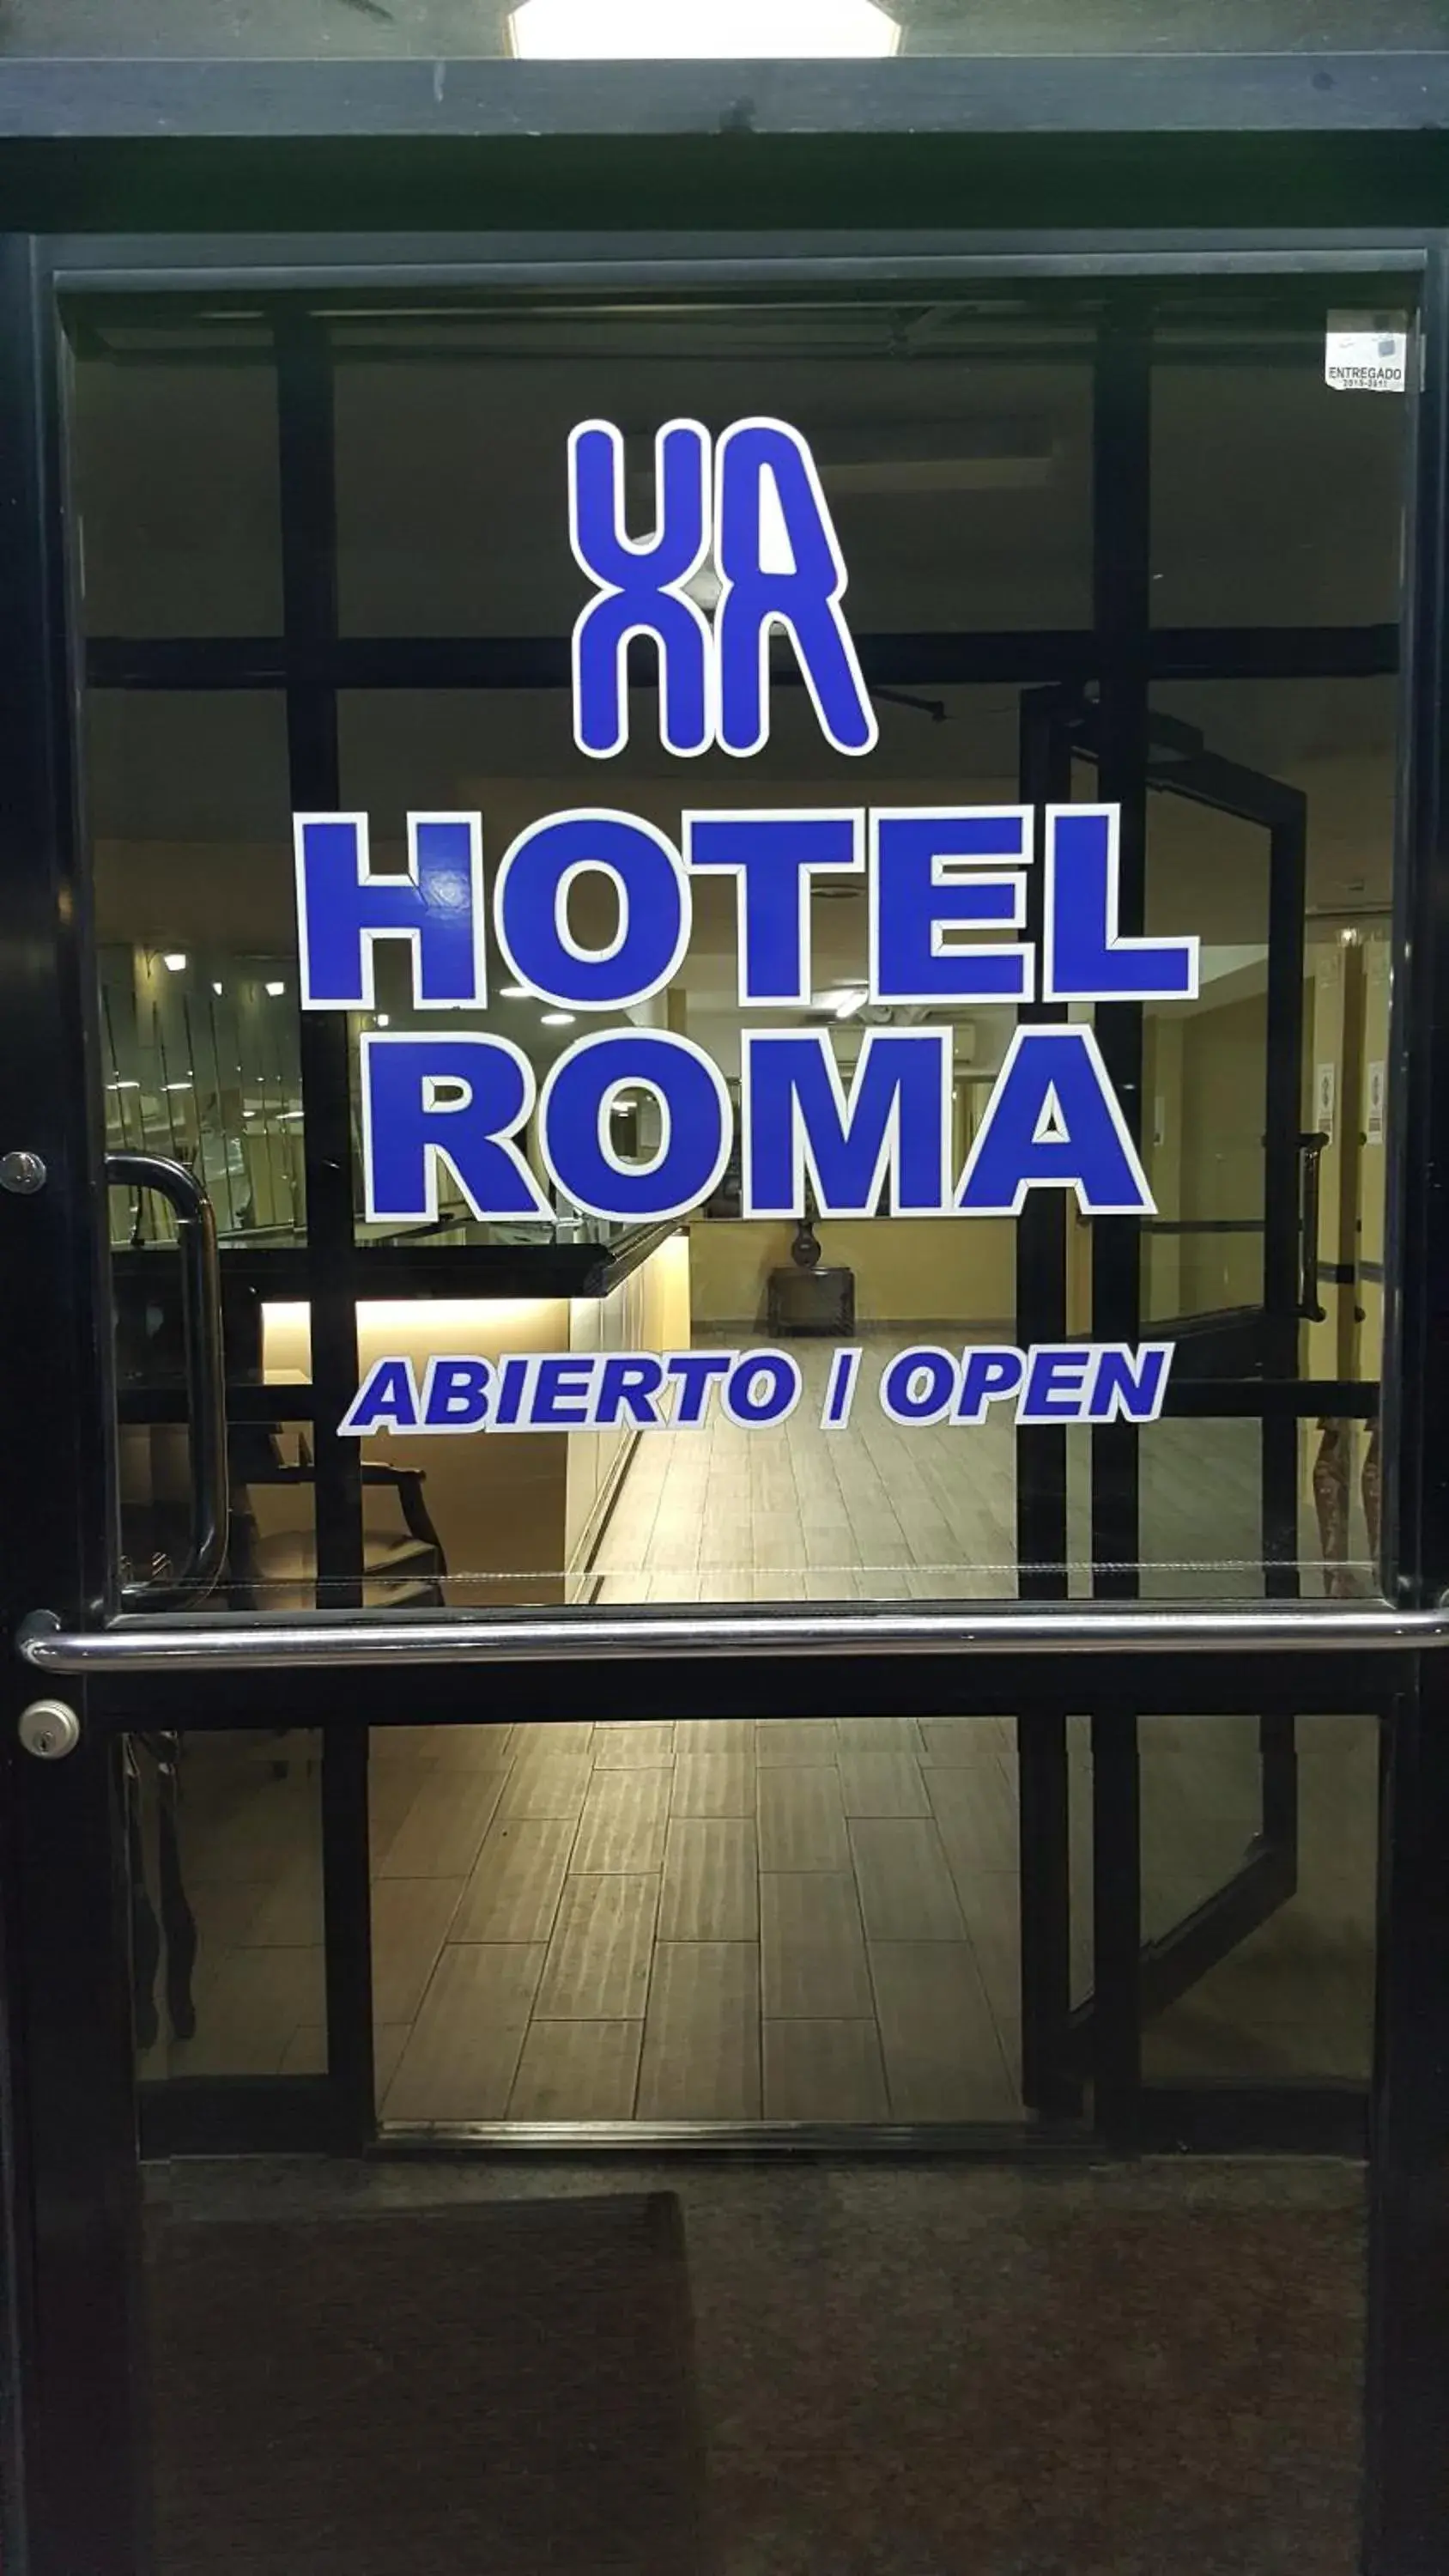 Property logo or sign in Hotel Roma